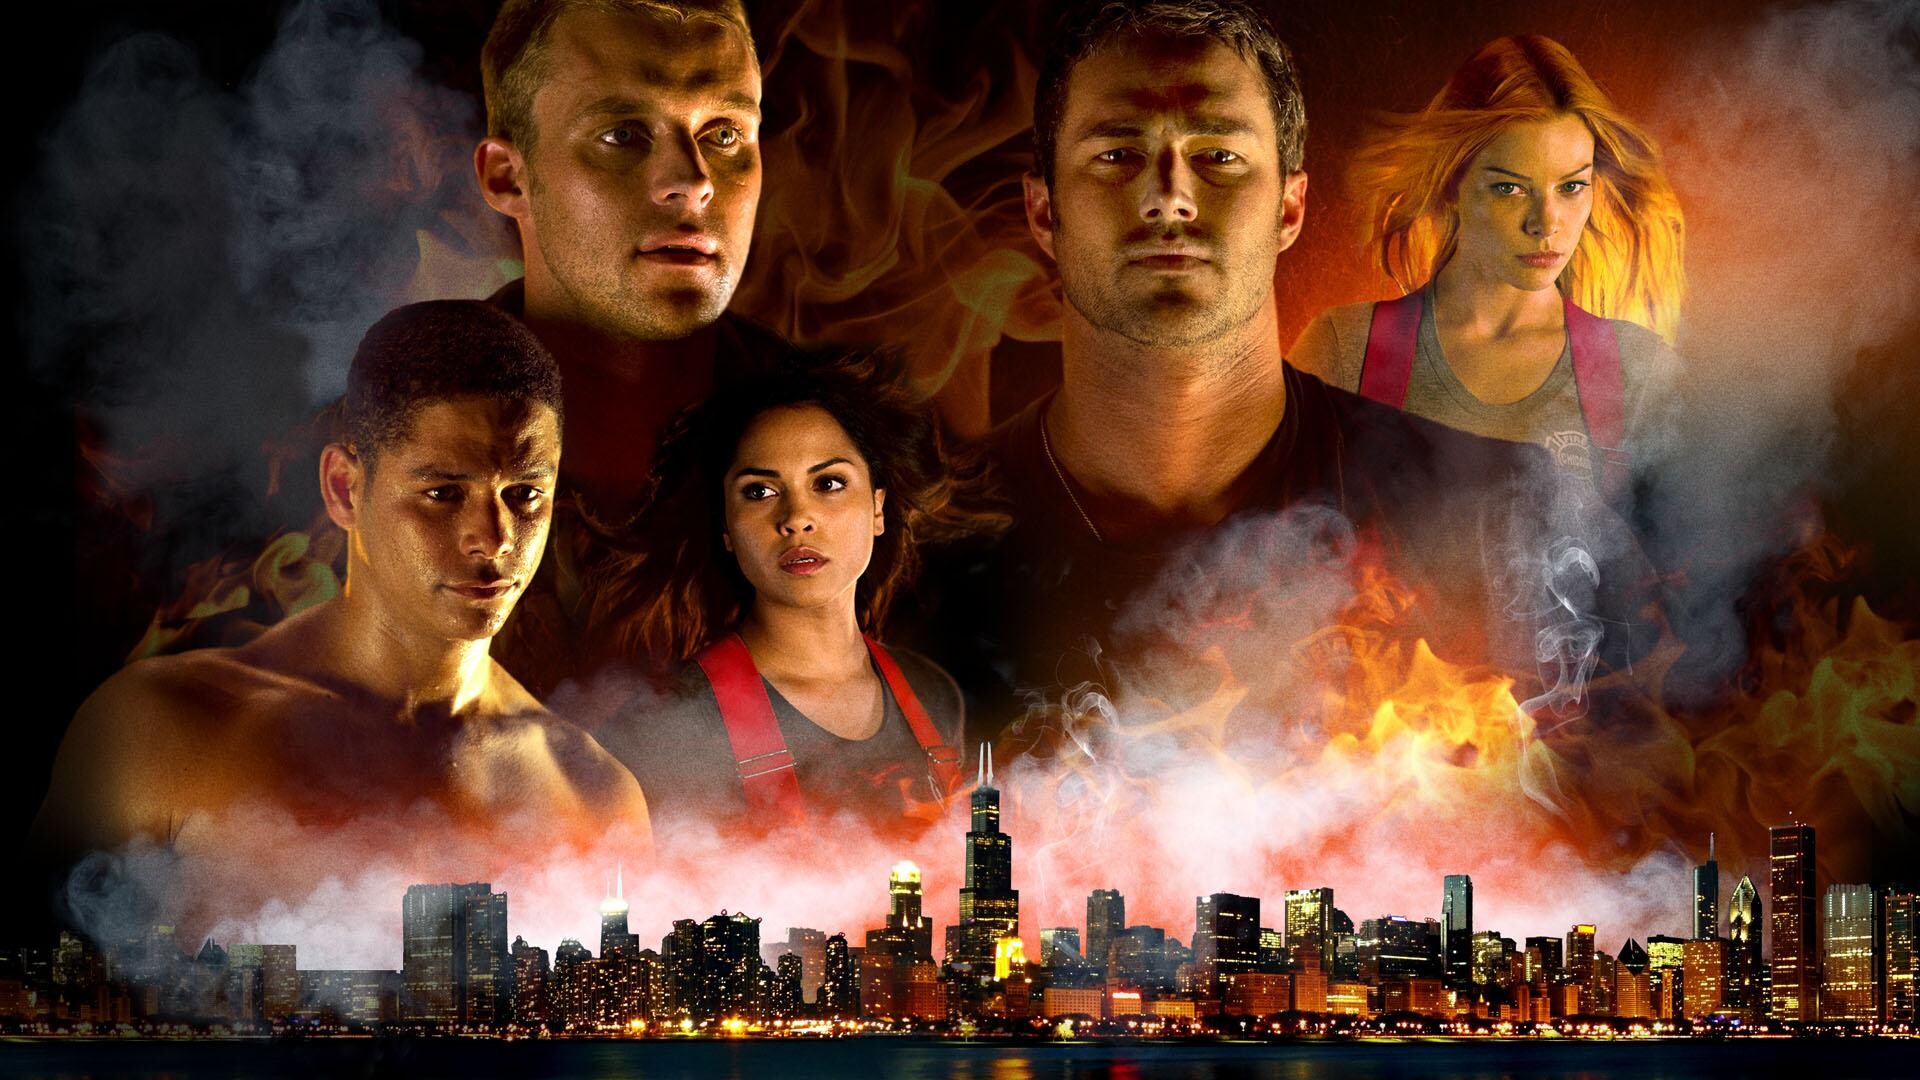 Chicago Fire (TV Series): Specially trained Rescue Squad, Team members from the Truck, Stressful and dangerous occupation. 1920x1080 Full HD Wallpaper.